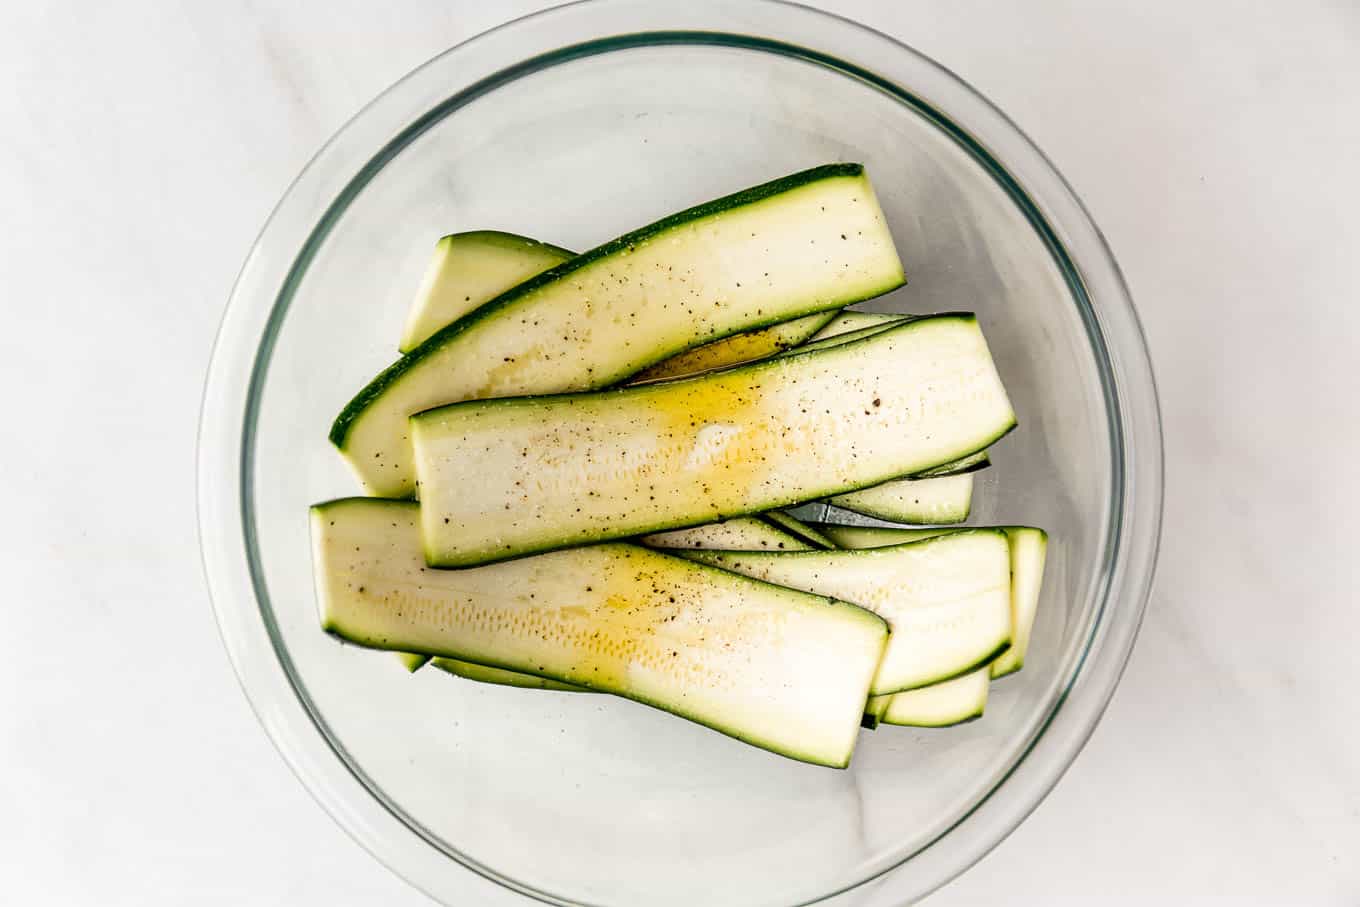 Slices of zucchini in a clear mixing bowl